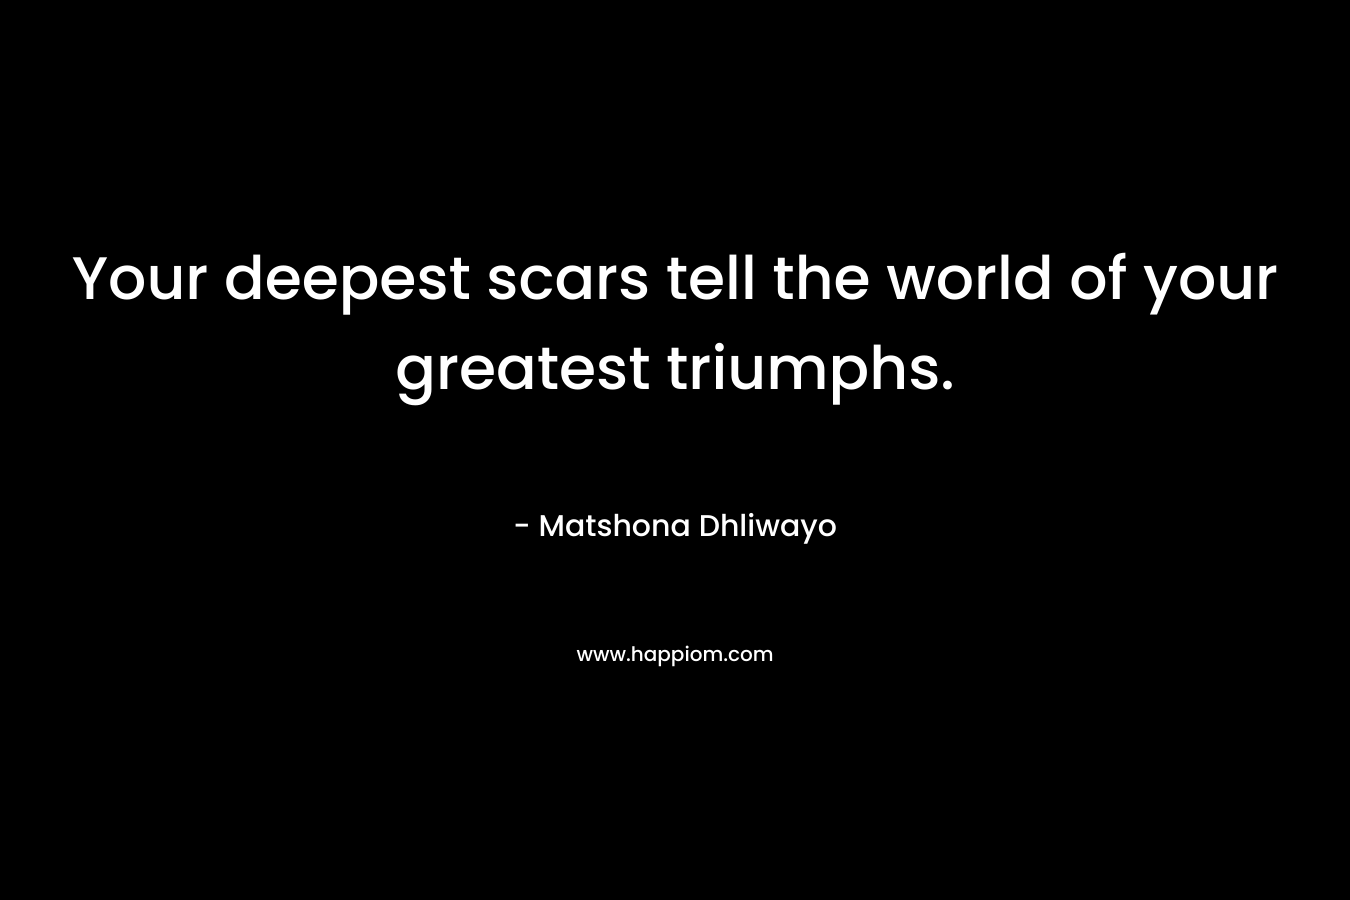 Your deepest scars tell the world of your greatest triumphs.